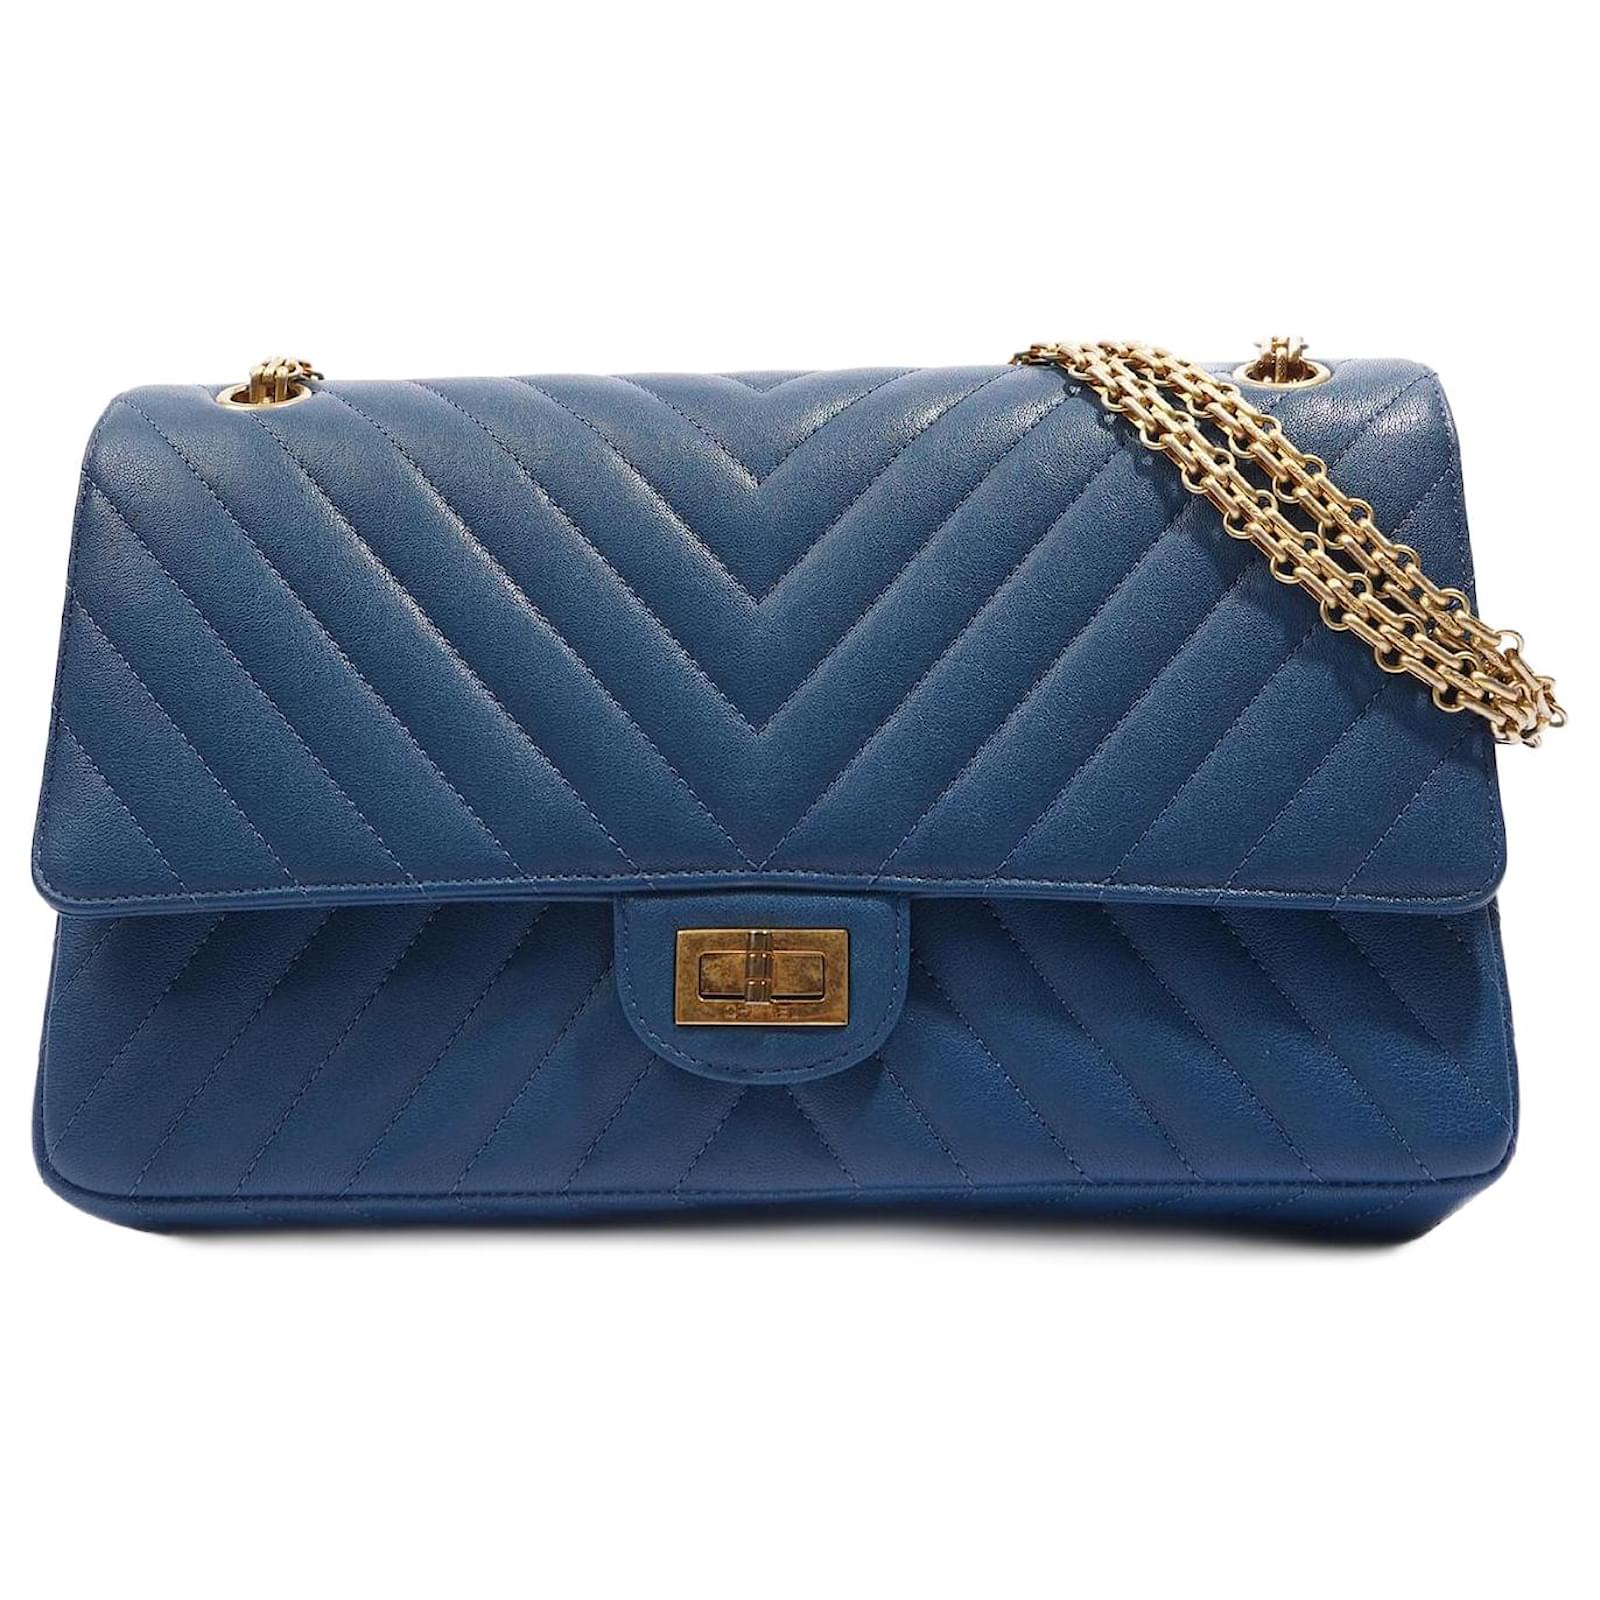 Chanel Teal Quilted Leather Reissue 2.55 Classic 225 Flap Bag 